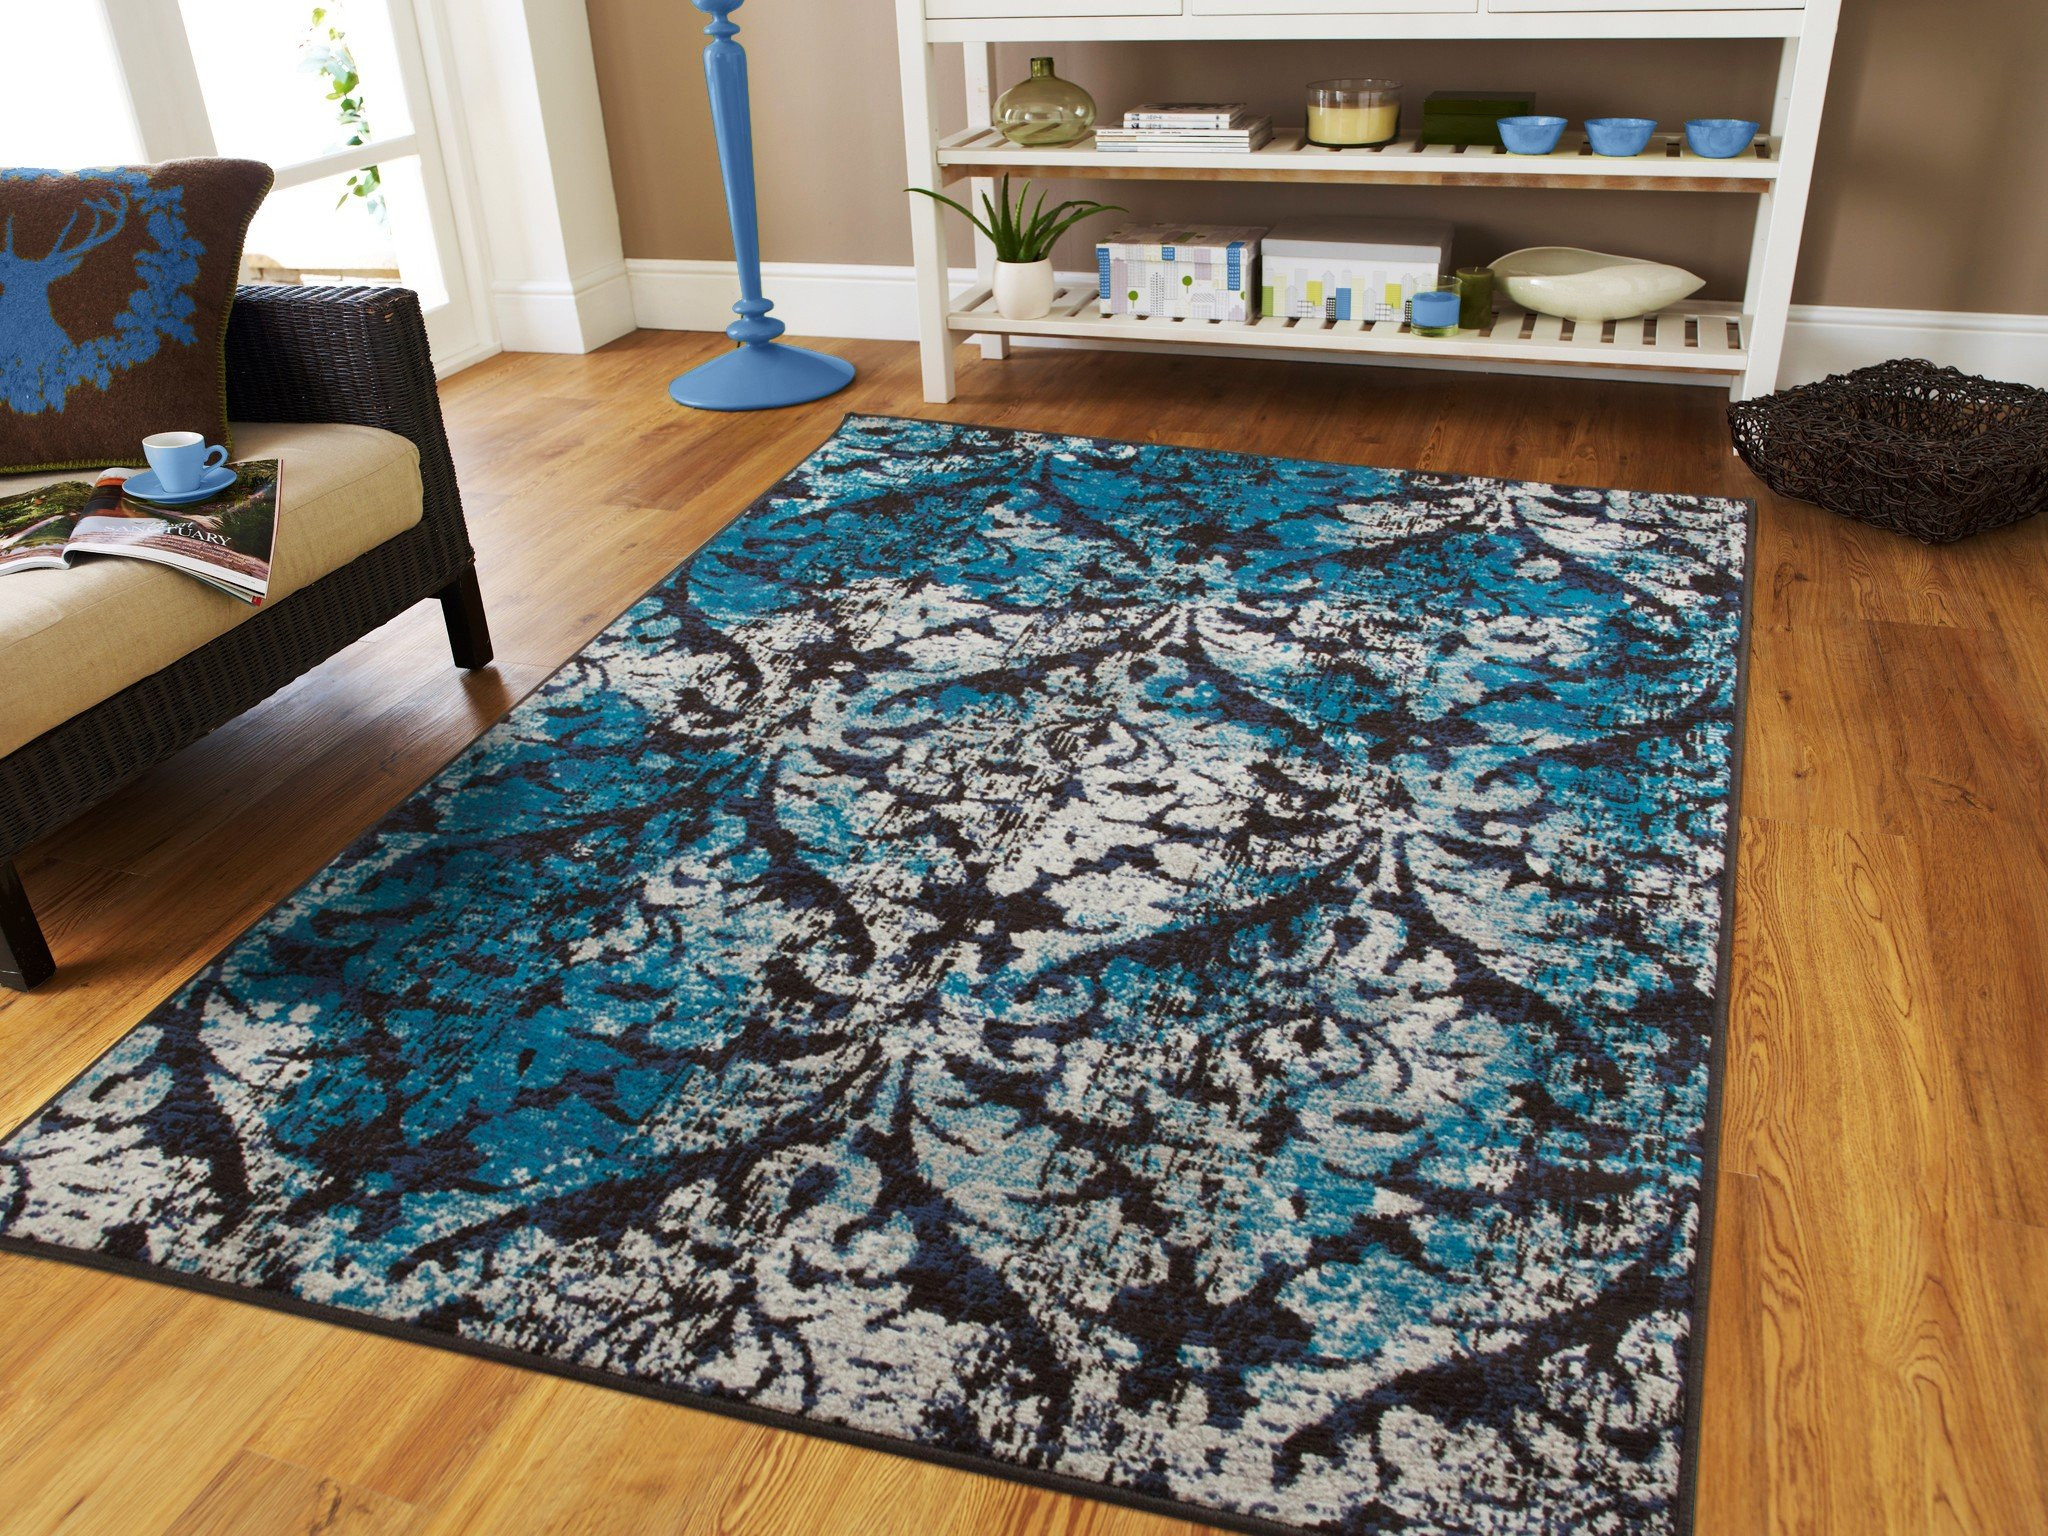 Living Room Rugs Amazon
 Buy Luxury Contemporary Rugs For Living Room Black Blue